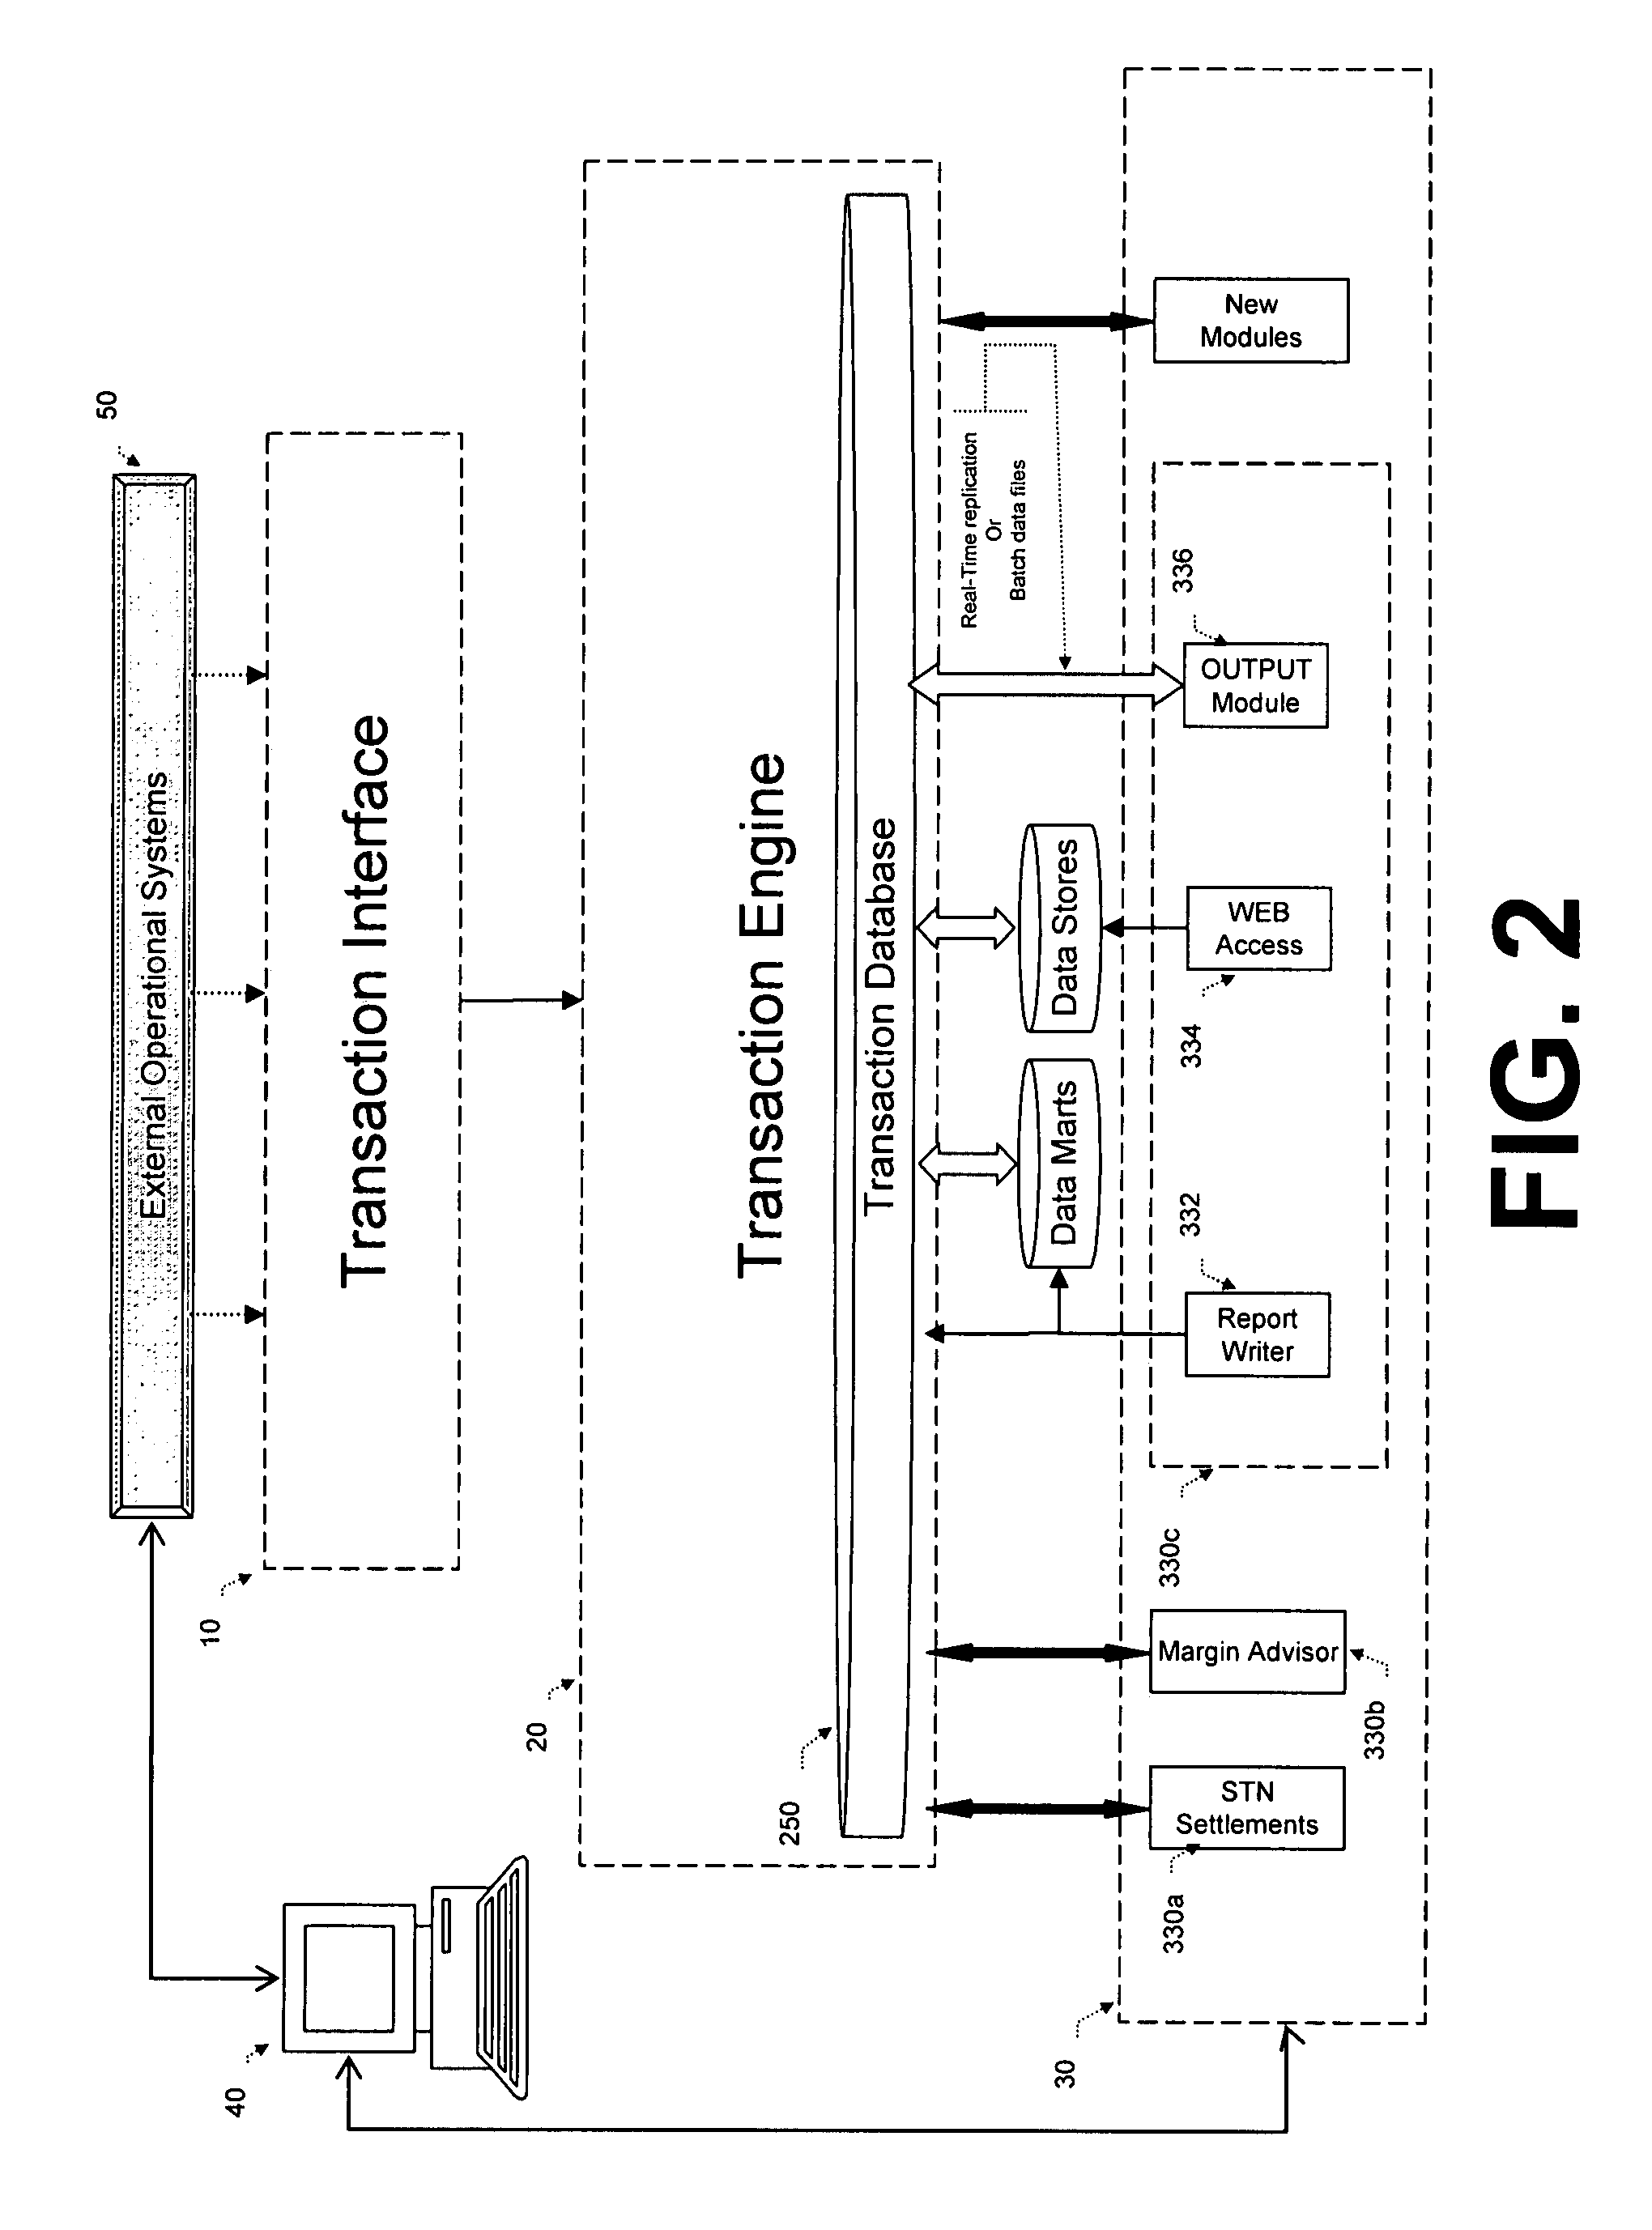 Transaction processing system and method